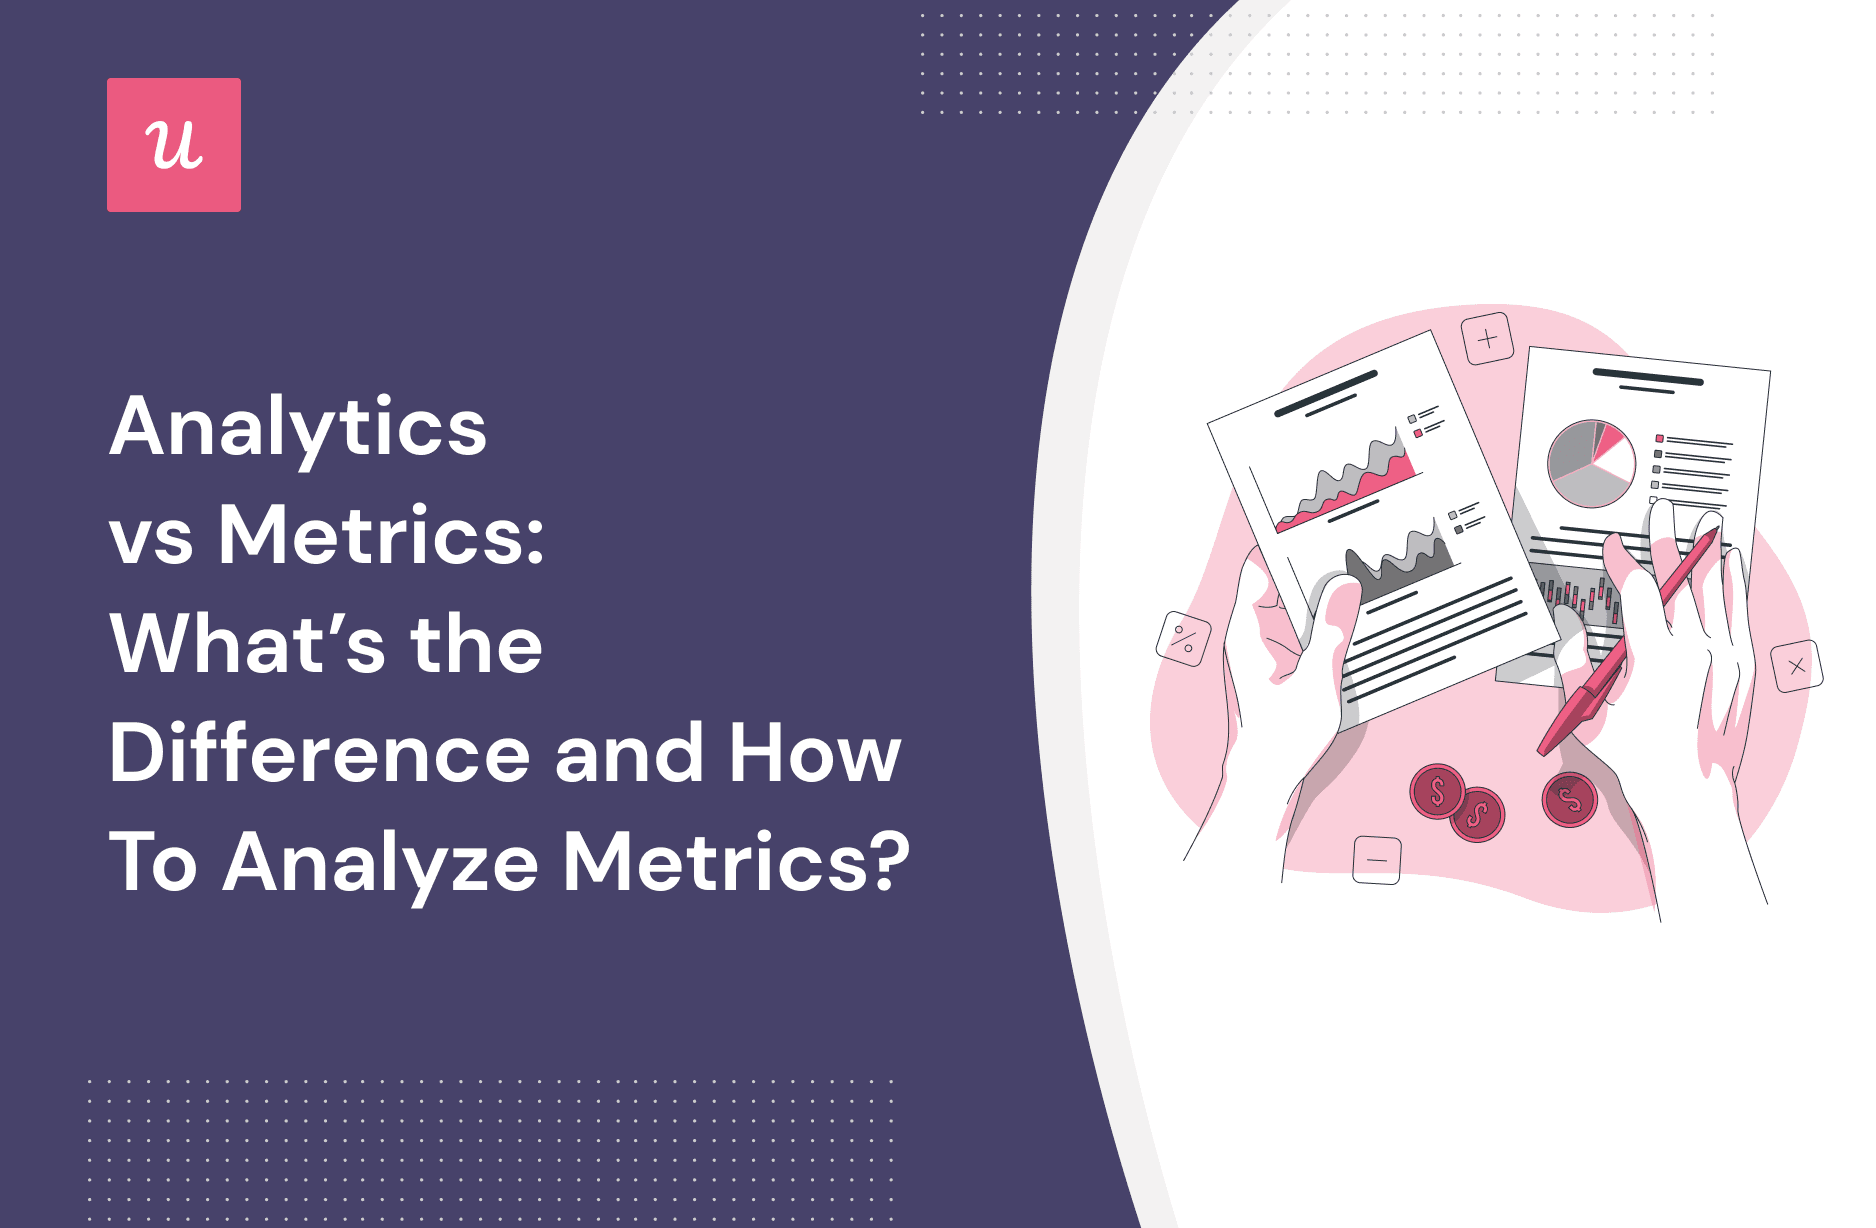 Analytics vs Metrics: What’s the Difference and How to Analyze Metrics? cover